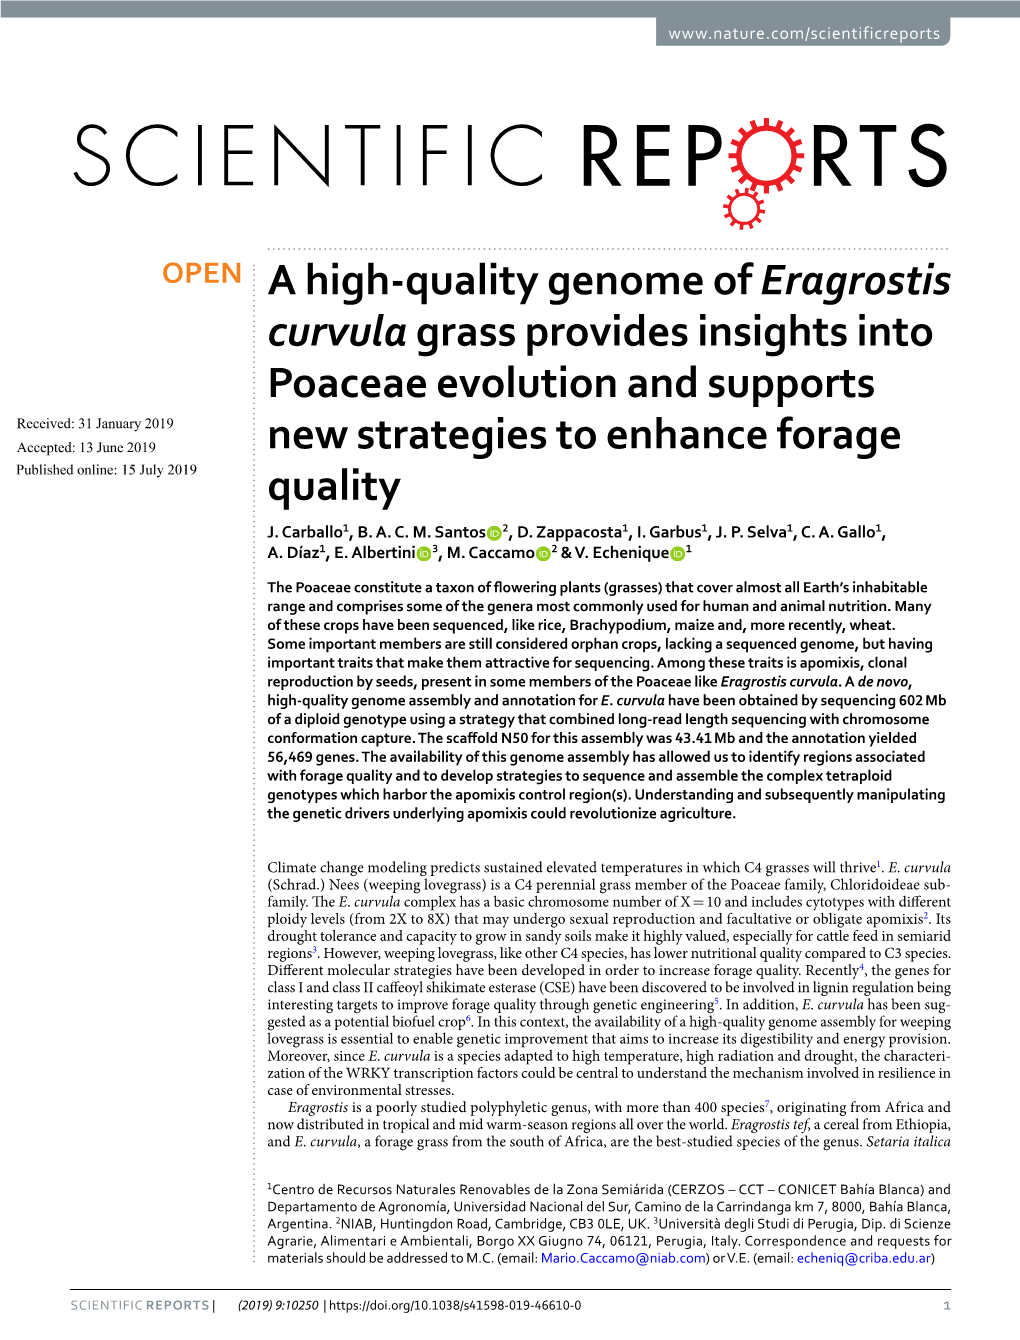 A High-Quality Genome of Eragrostis Curvula Grass Provides Insights Into Poaceae Evolution and Supports New Strategies to Enhanc